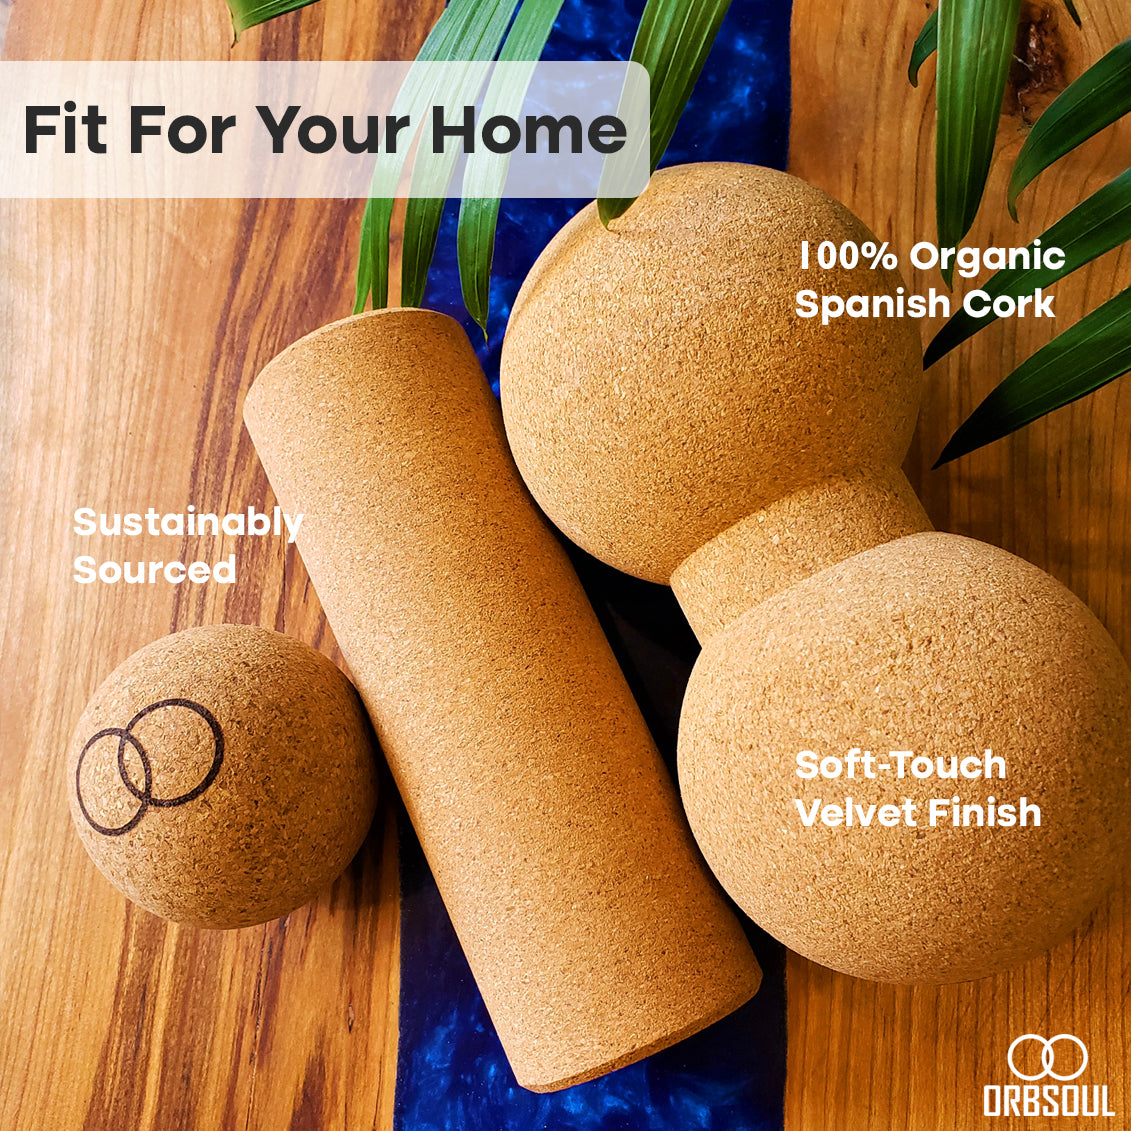 serenity cork massage roller 3 piece set. Fit for your home. 100% organic spanish cork. Sustainably sourced. Soft-touch velvet finish